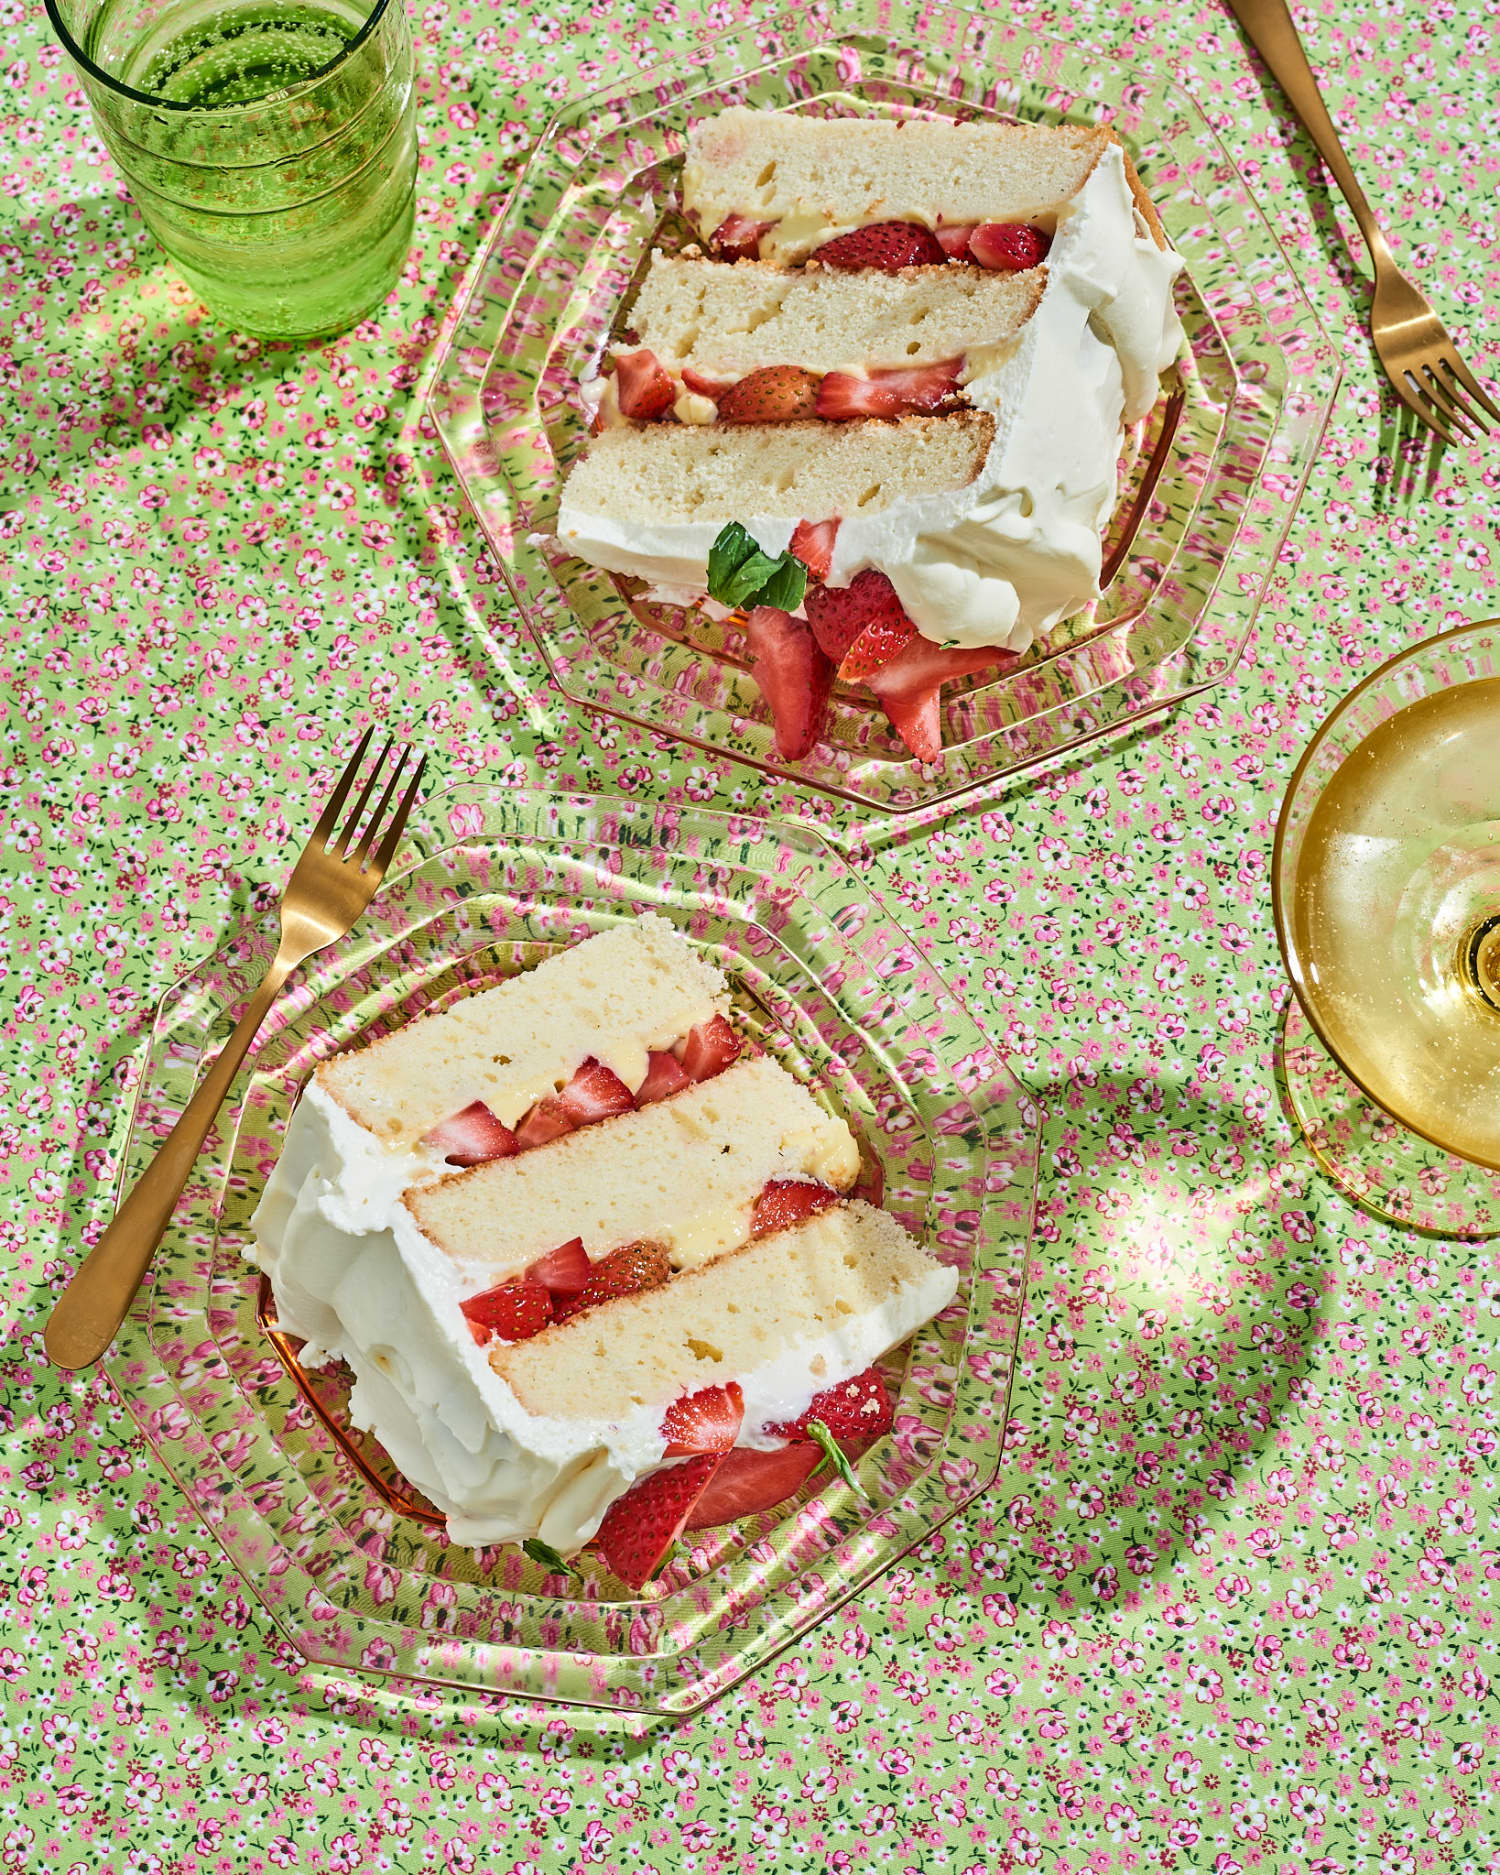 Strawberry Cassata Cake Is So Good, Both My Mom and Sister Had It at Their Weddings